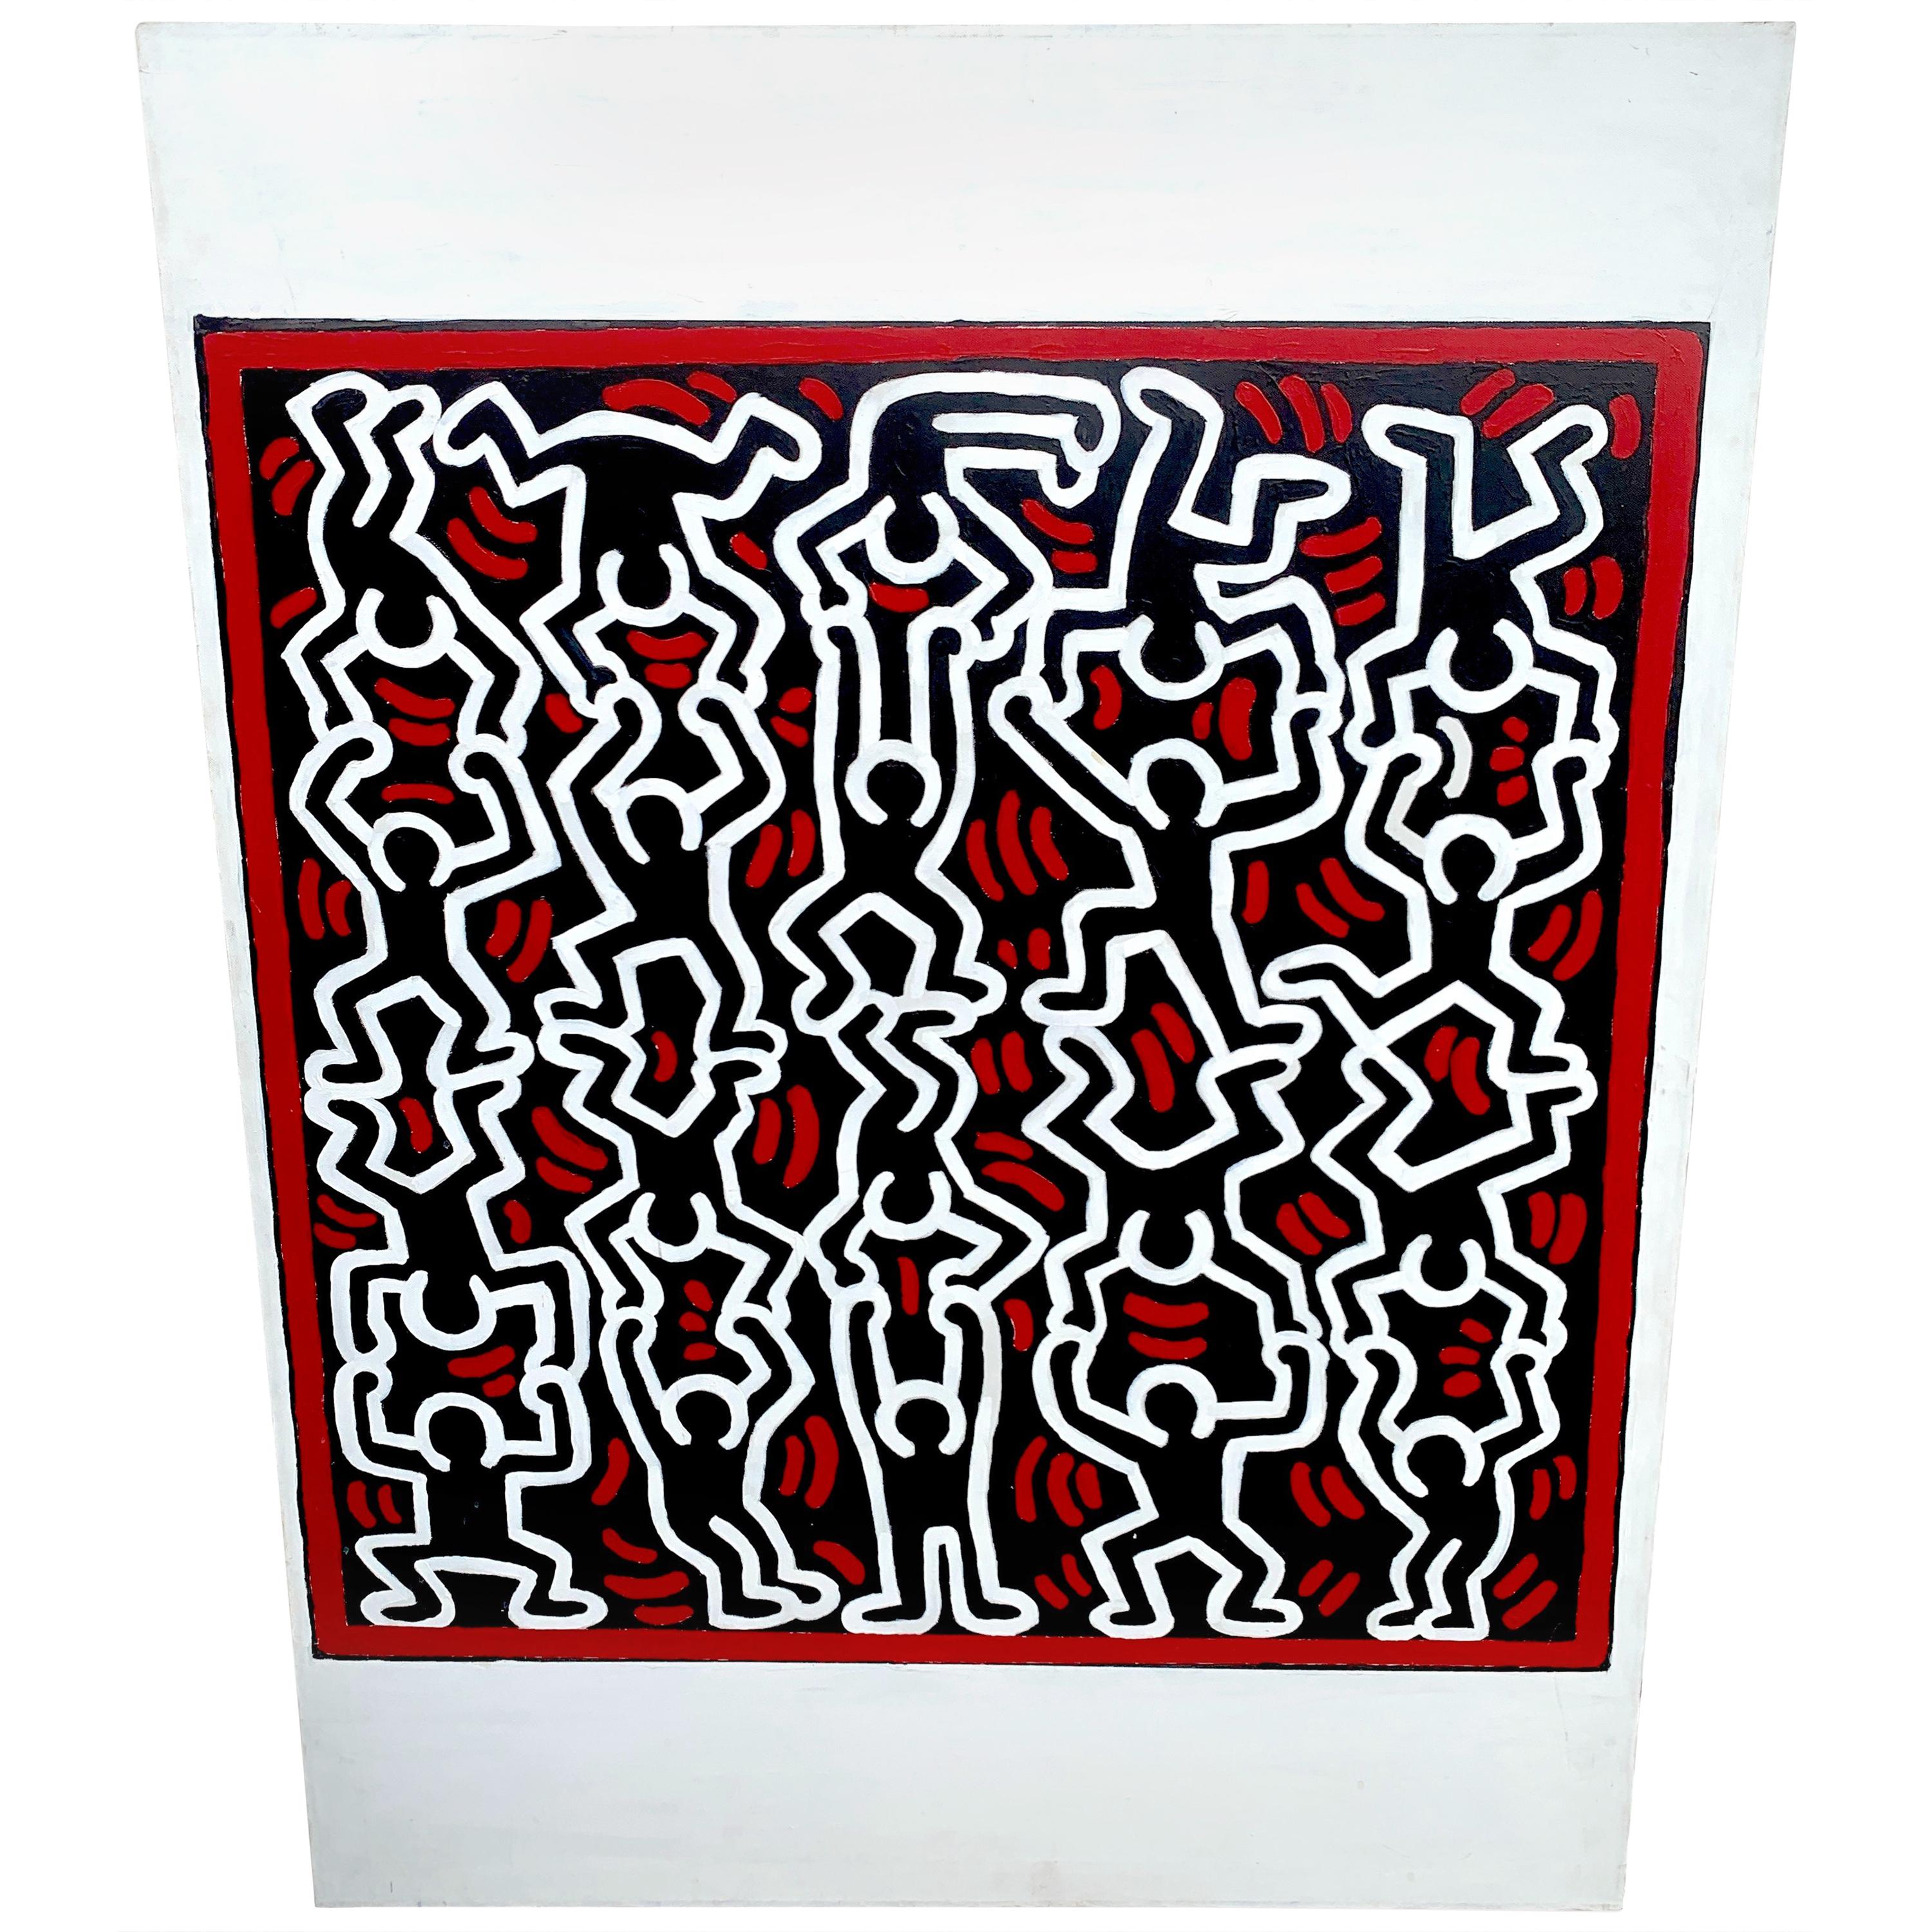 Untitled, After Keith Haring